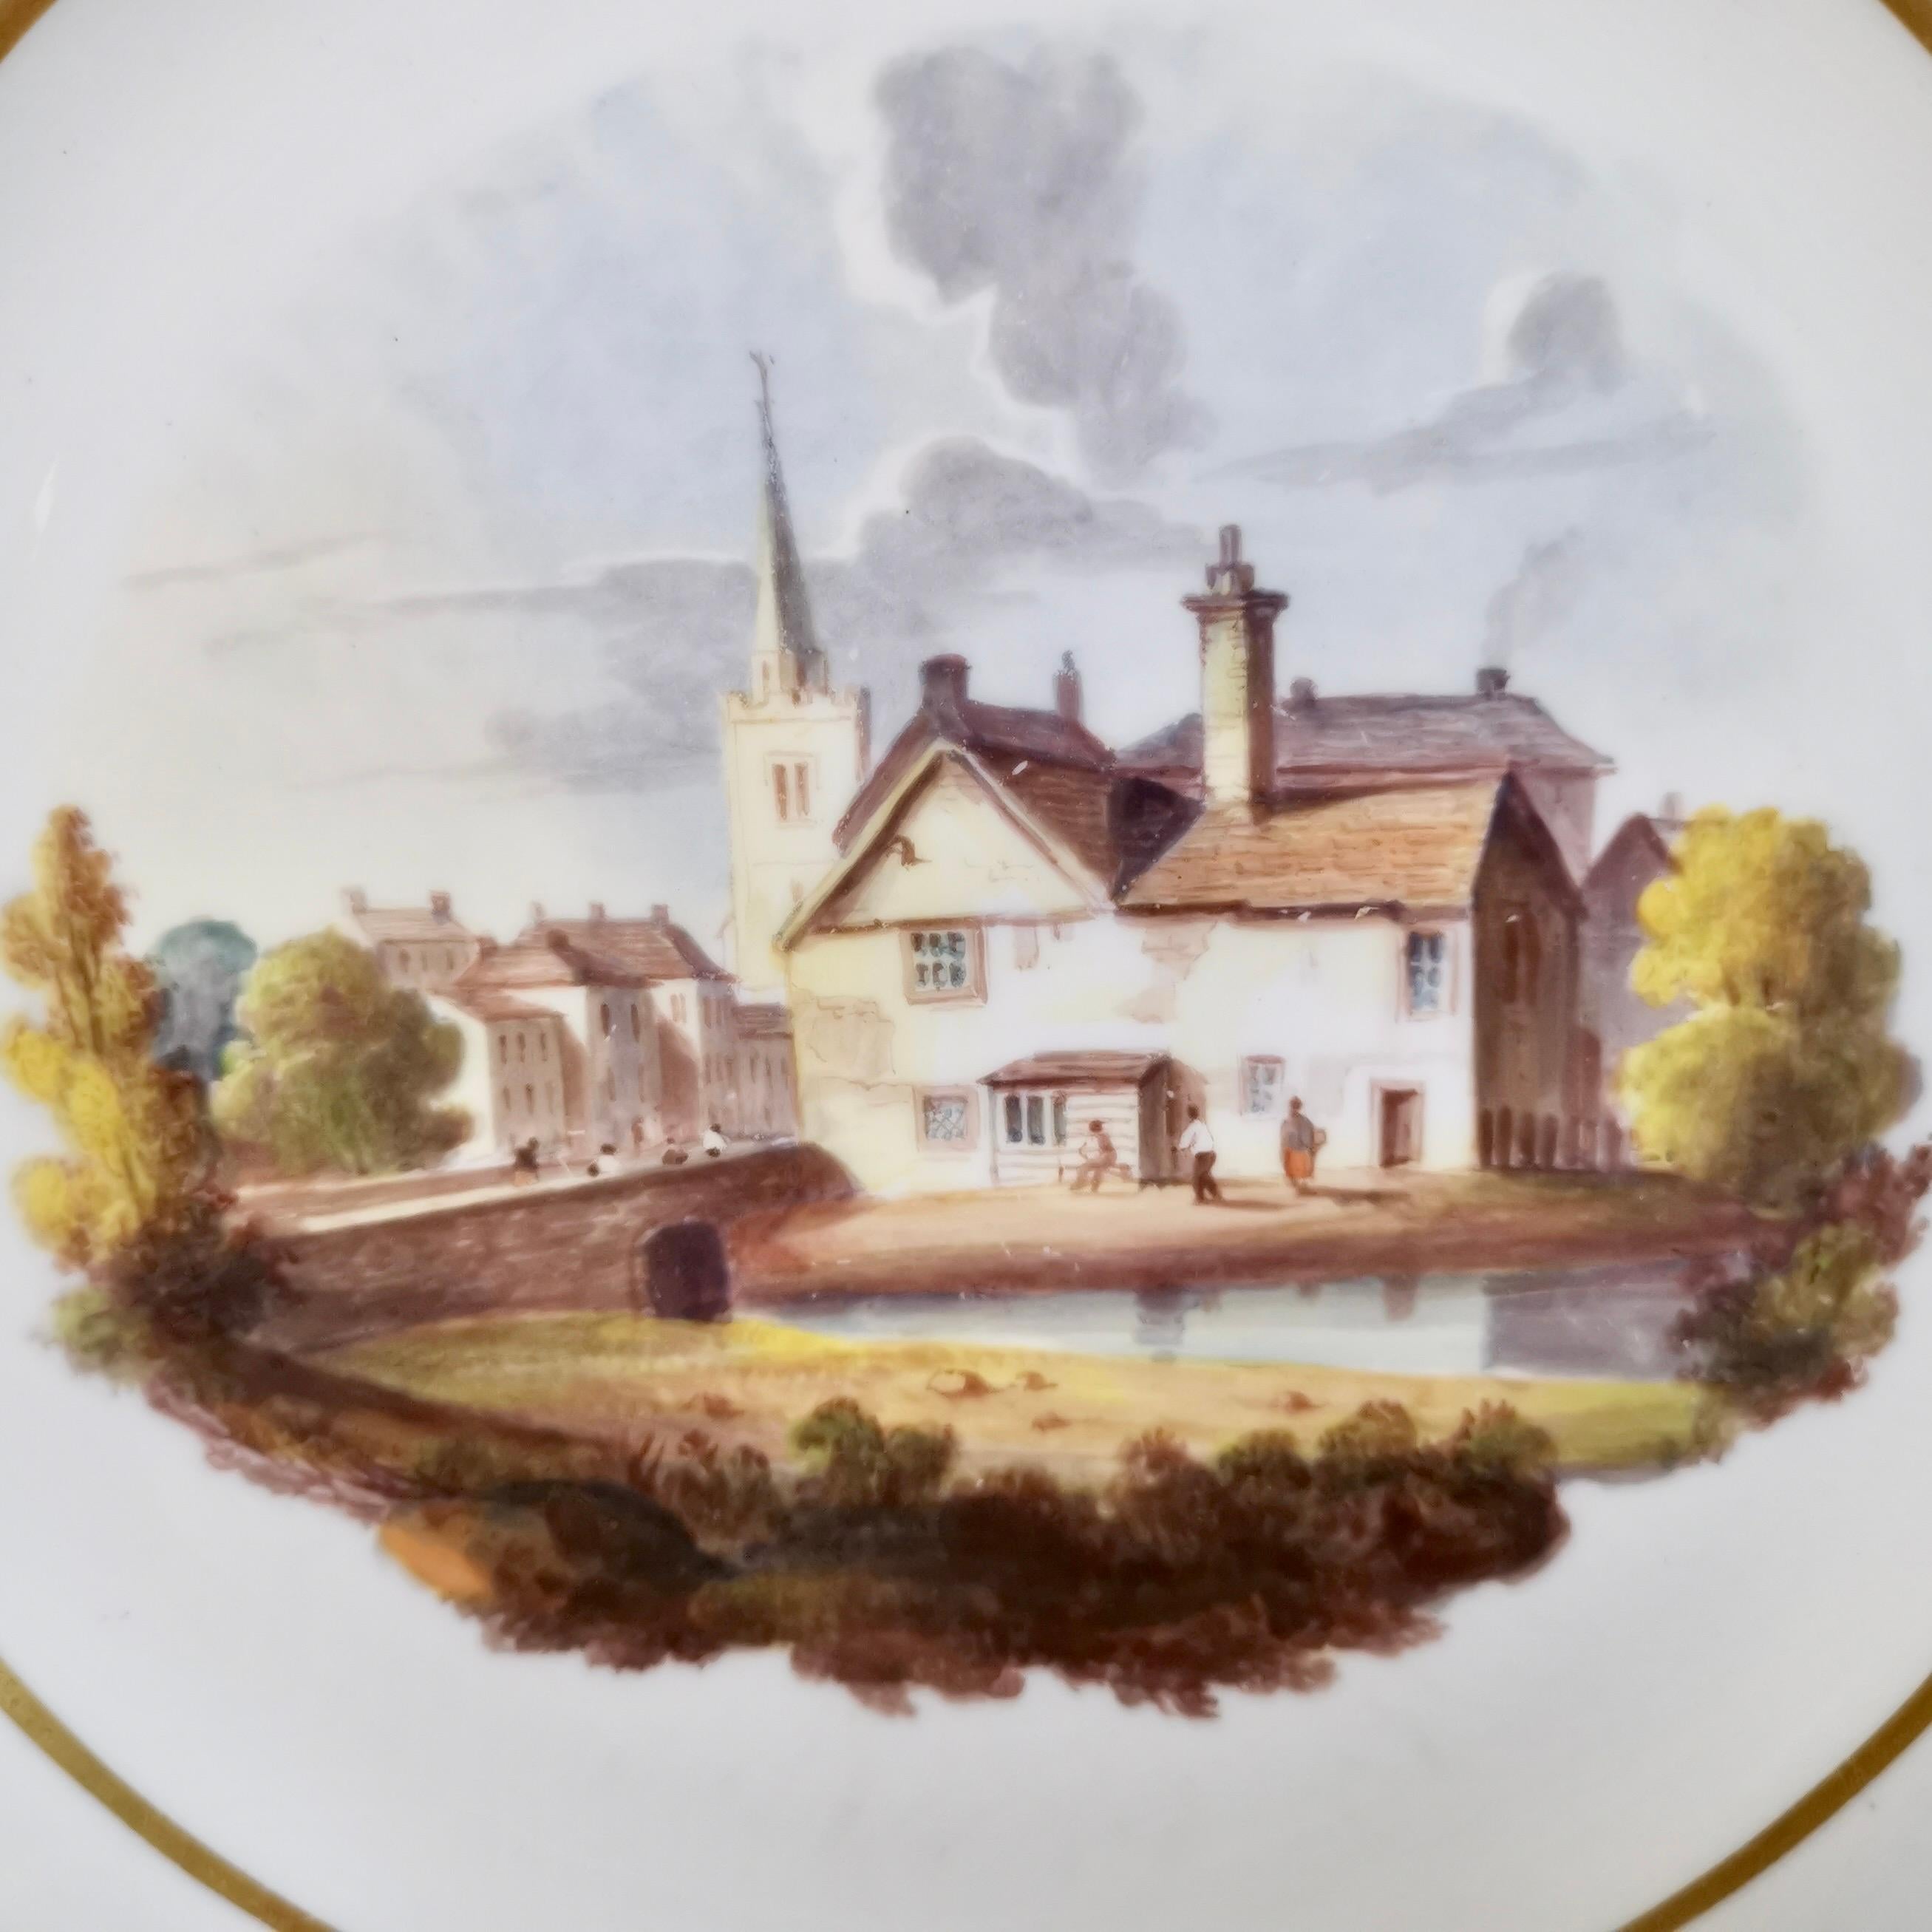 This is a dessert plate made by Spode in about 1822, which was the Regency era. The plate is made of Felspar porcelain and decorated with a beautiful hand painted landscape scene. The plate would have belonged to a large dessert service of which